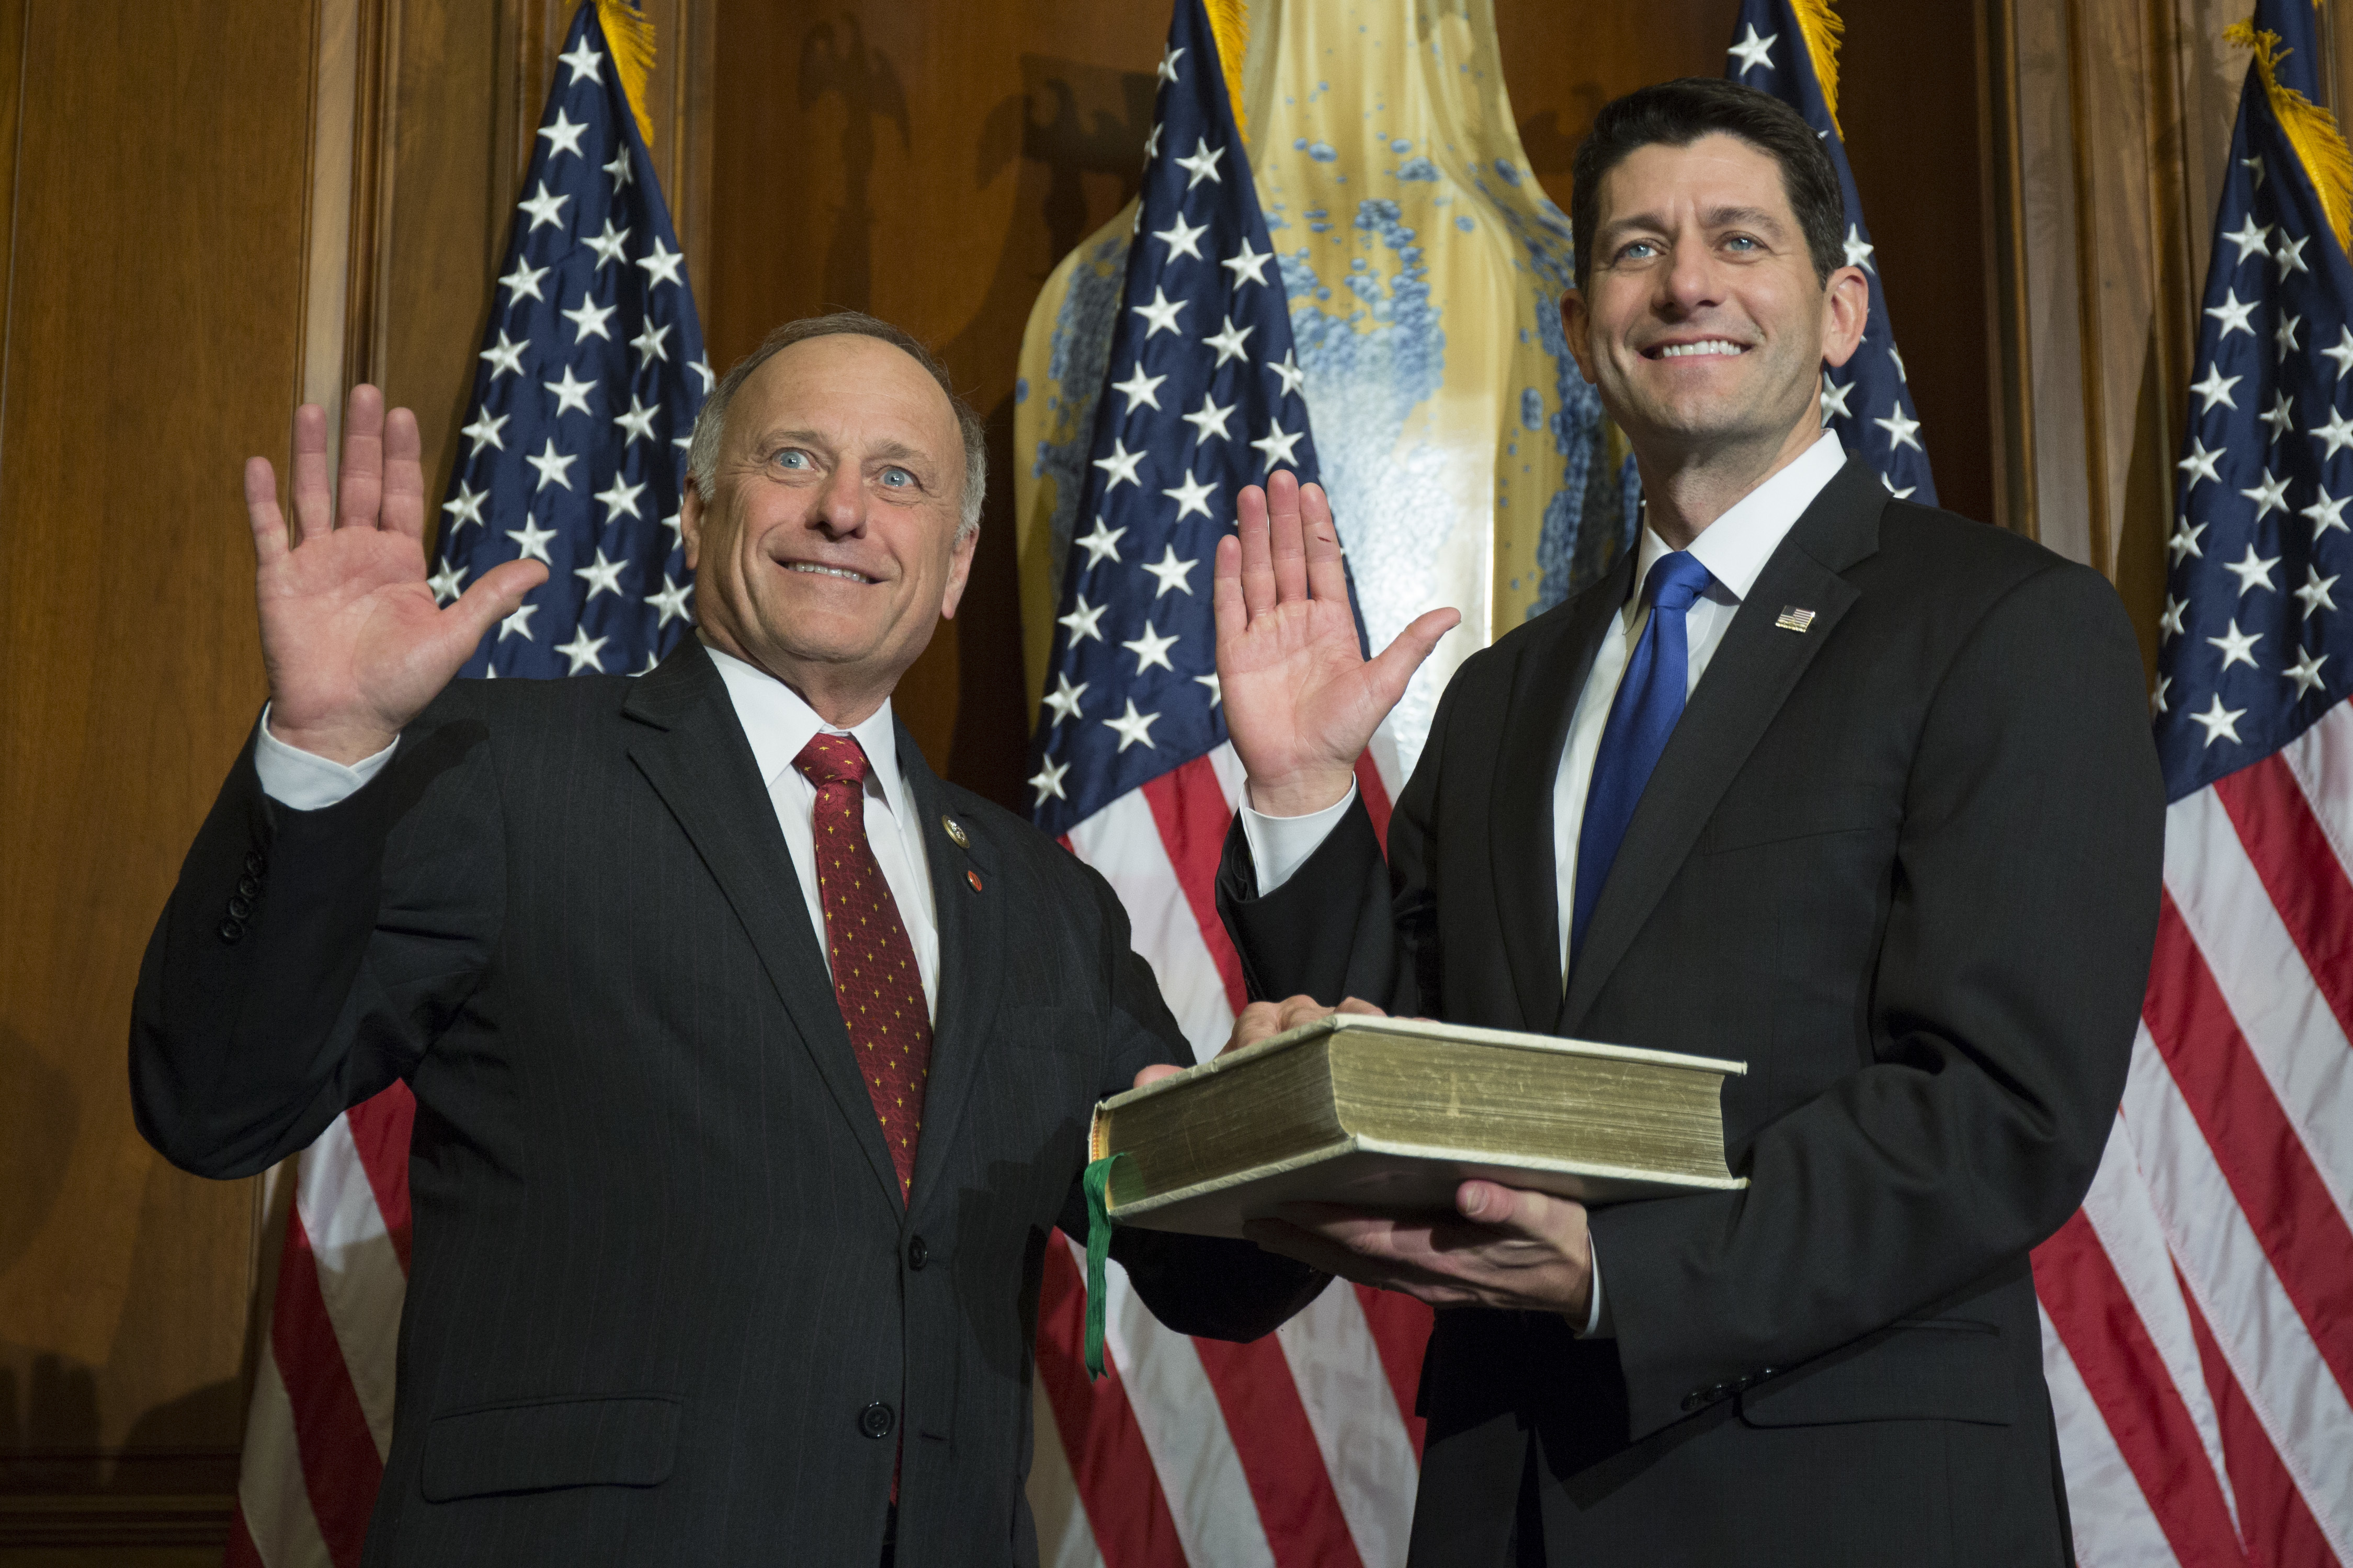 House Speaker Paul Ryan of Wis. administers the House oath of office to Rep. Steve King, R-Iowa., during a mock swearing in ceremony on Capitol Hill in Washington, Tuesday, Jan. 3, 2017. (AP Photo/Zach Gibson)